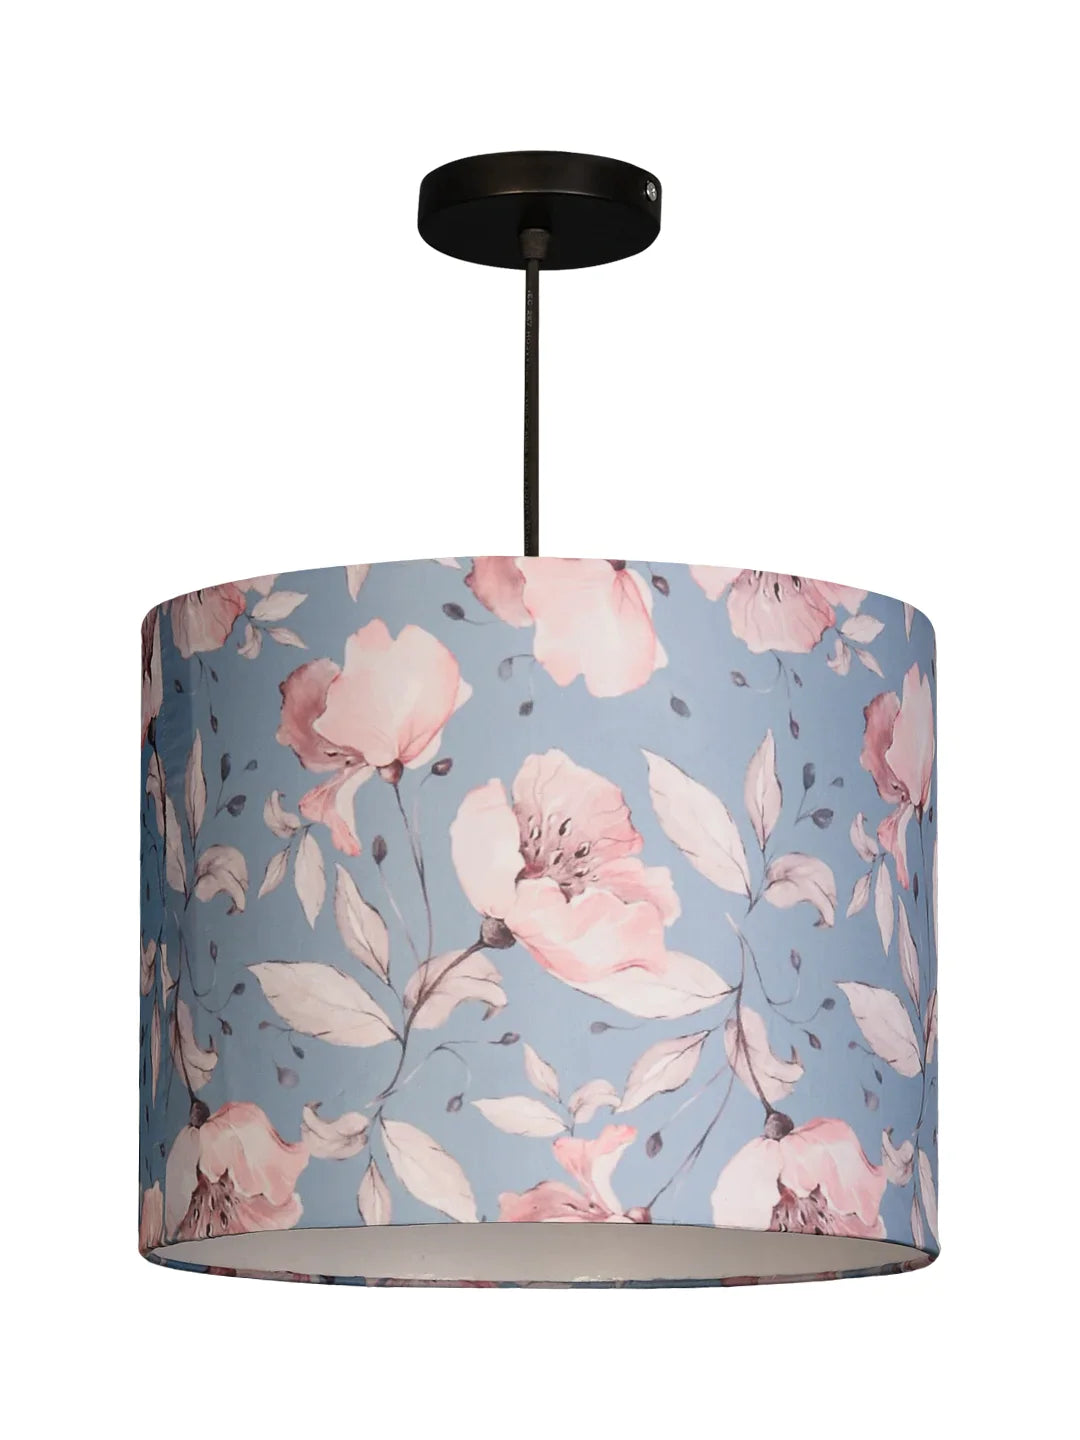 Turquoise Floral Round Hanging Shade